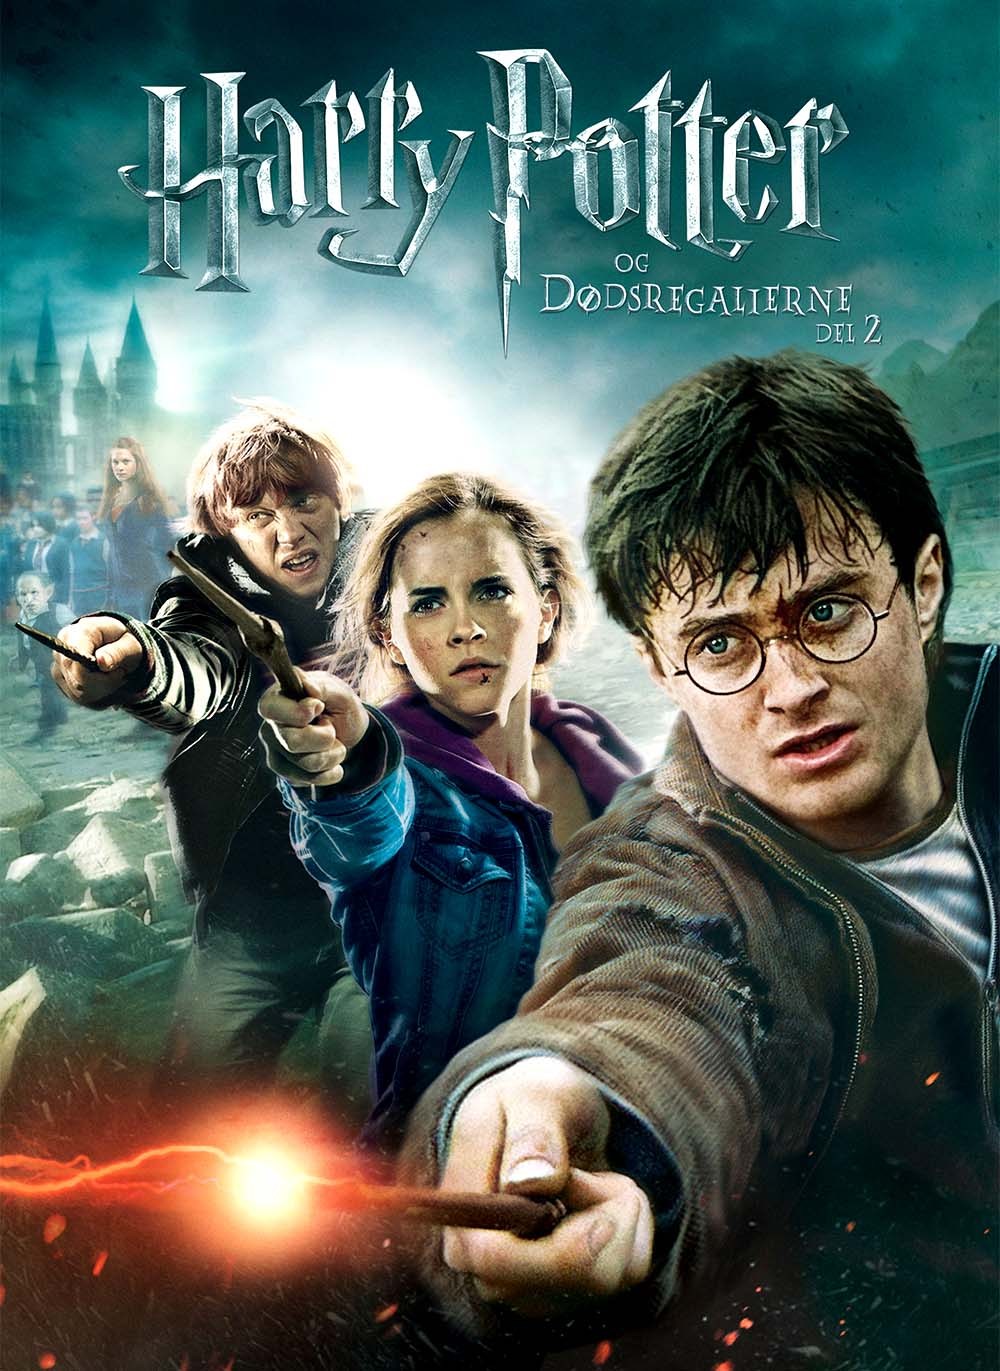 harry potter and the deathly hallows part 2 Hindi dubbed HD